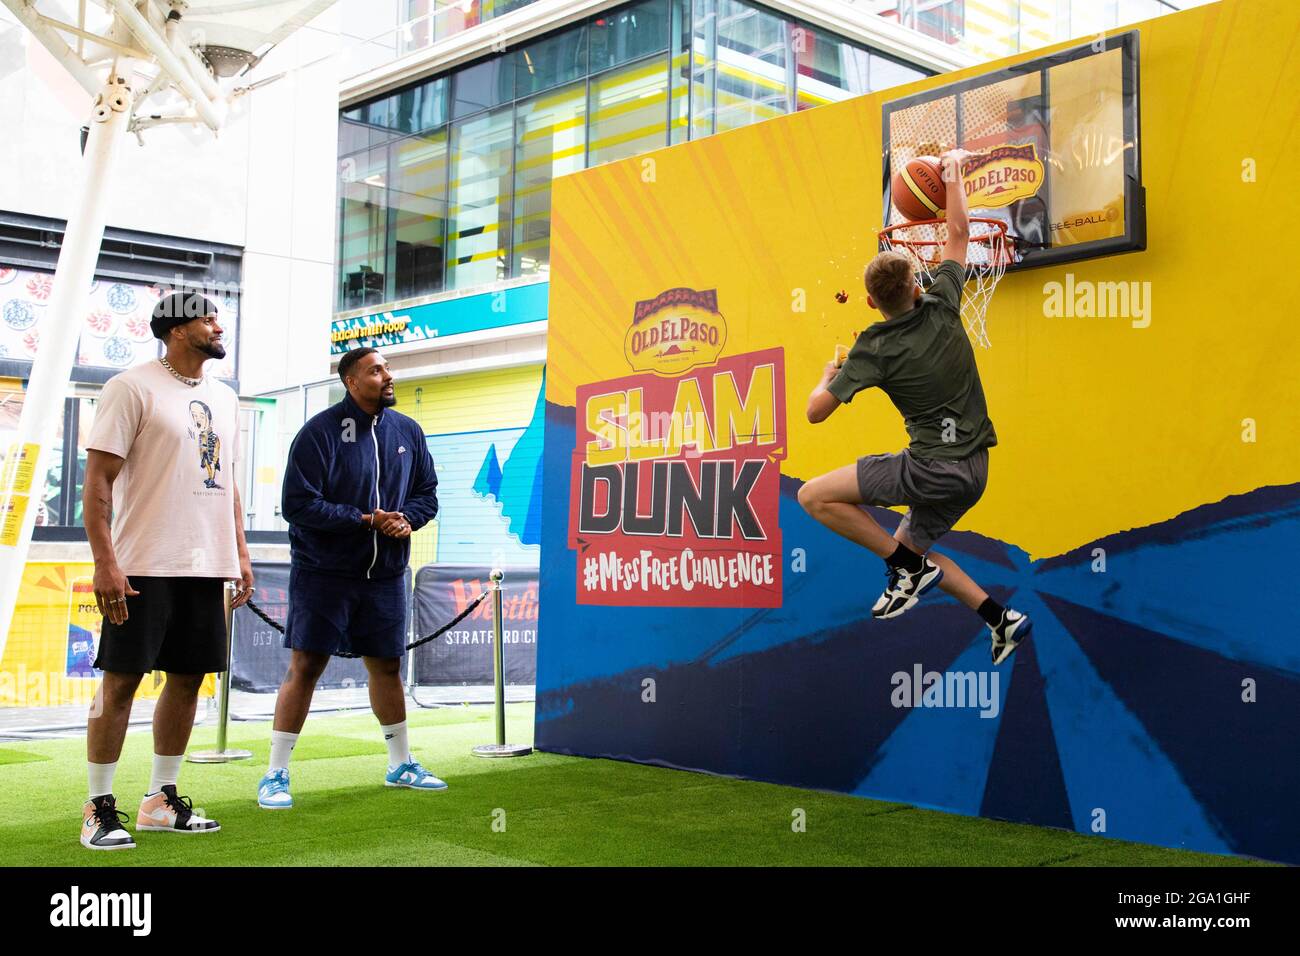 EDITORIAL USE ONLY (Left-right) Ashley and Jordan Banjo watch as Gabriel Gibbon, age 13 takes part in the Old El Paso Slam Dunk #MessFreeChallenge at Westfield, London, to celebrate the launch of